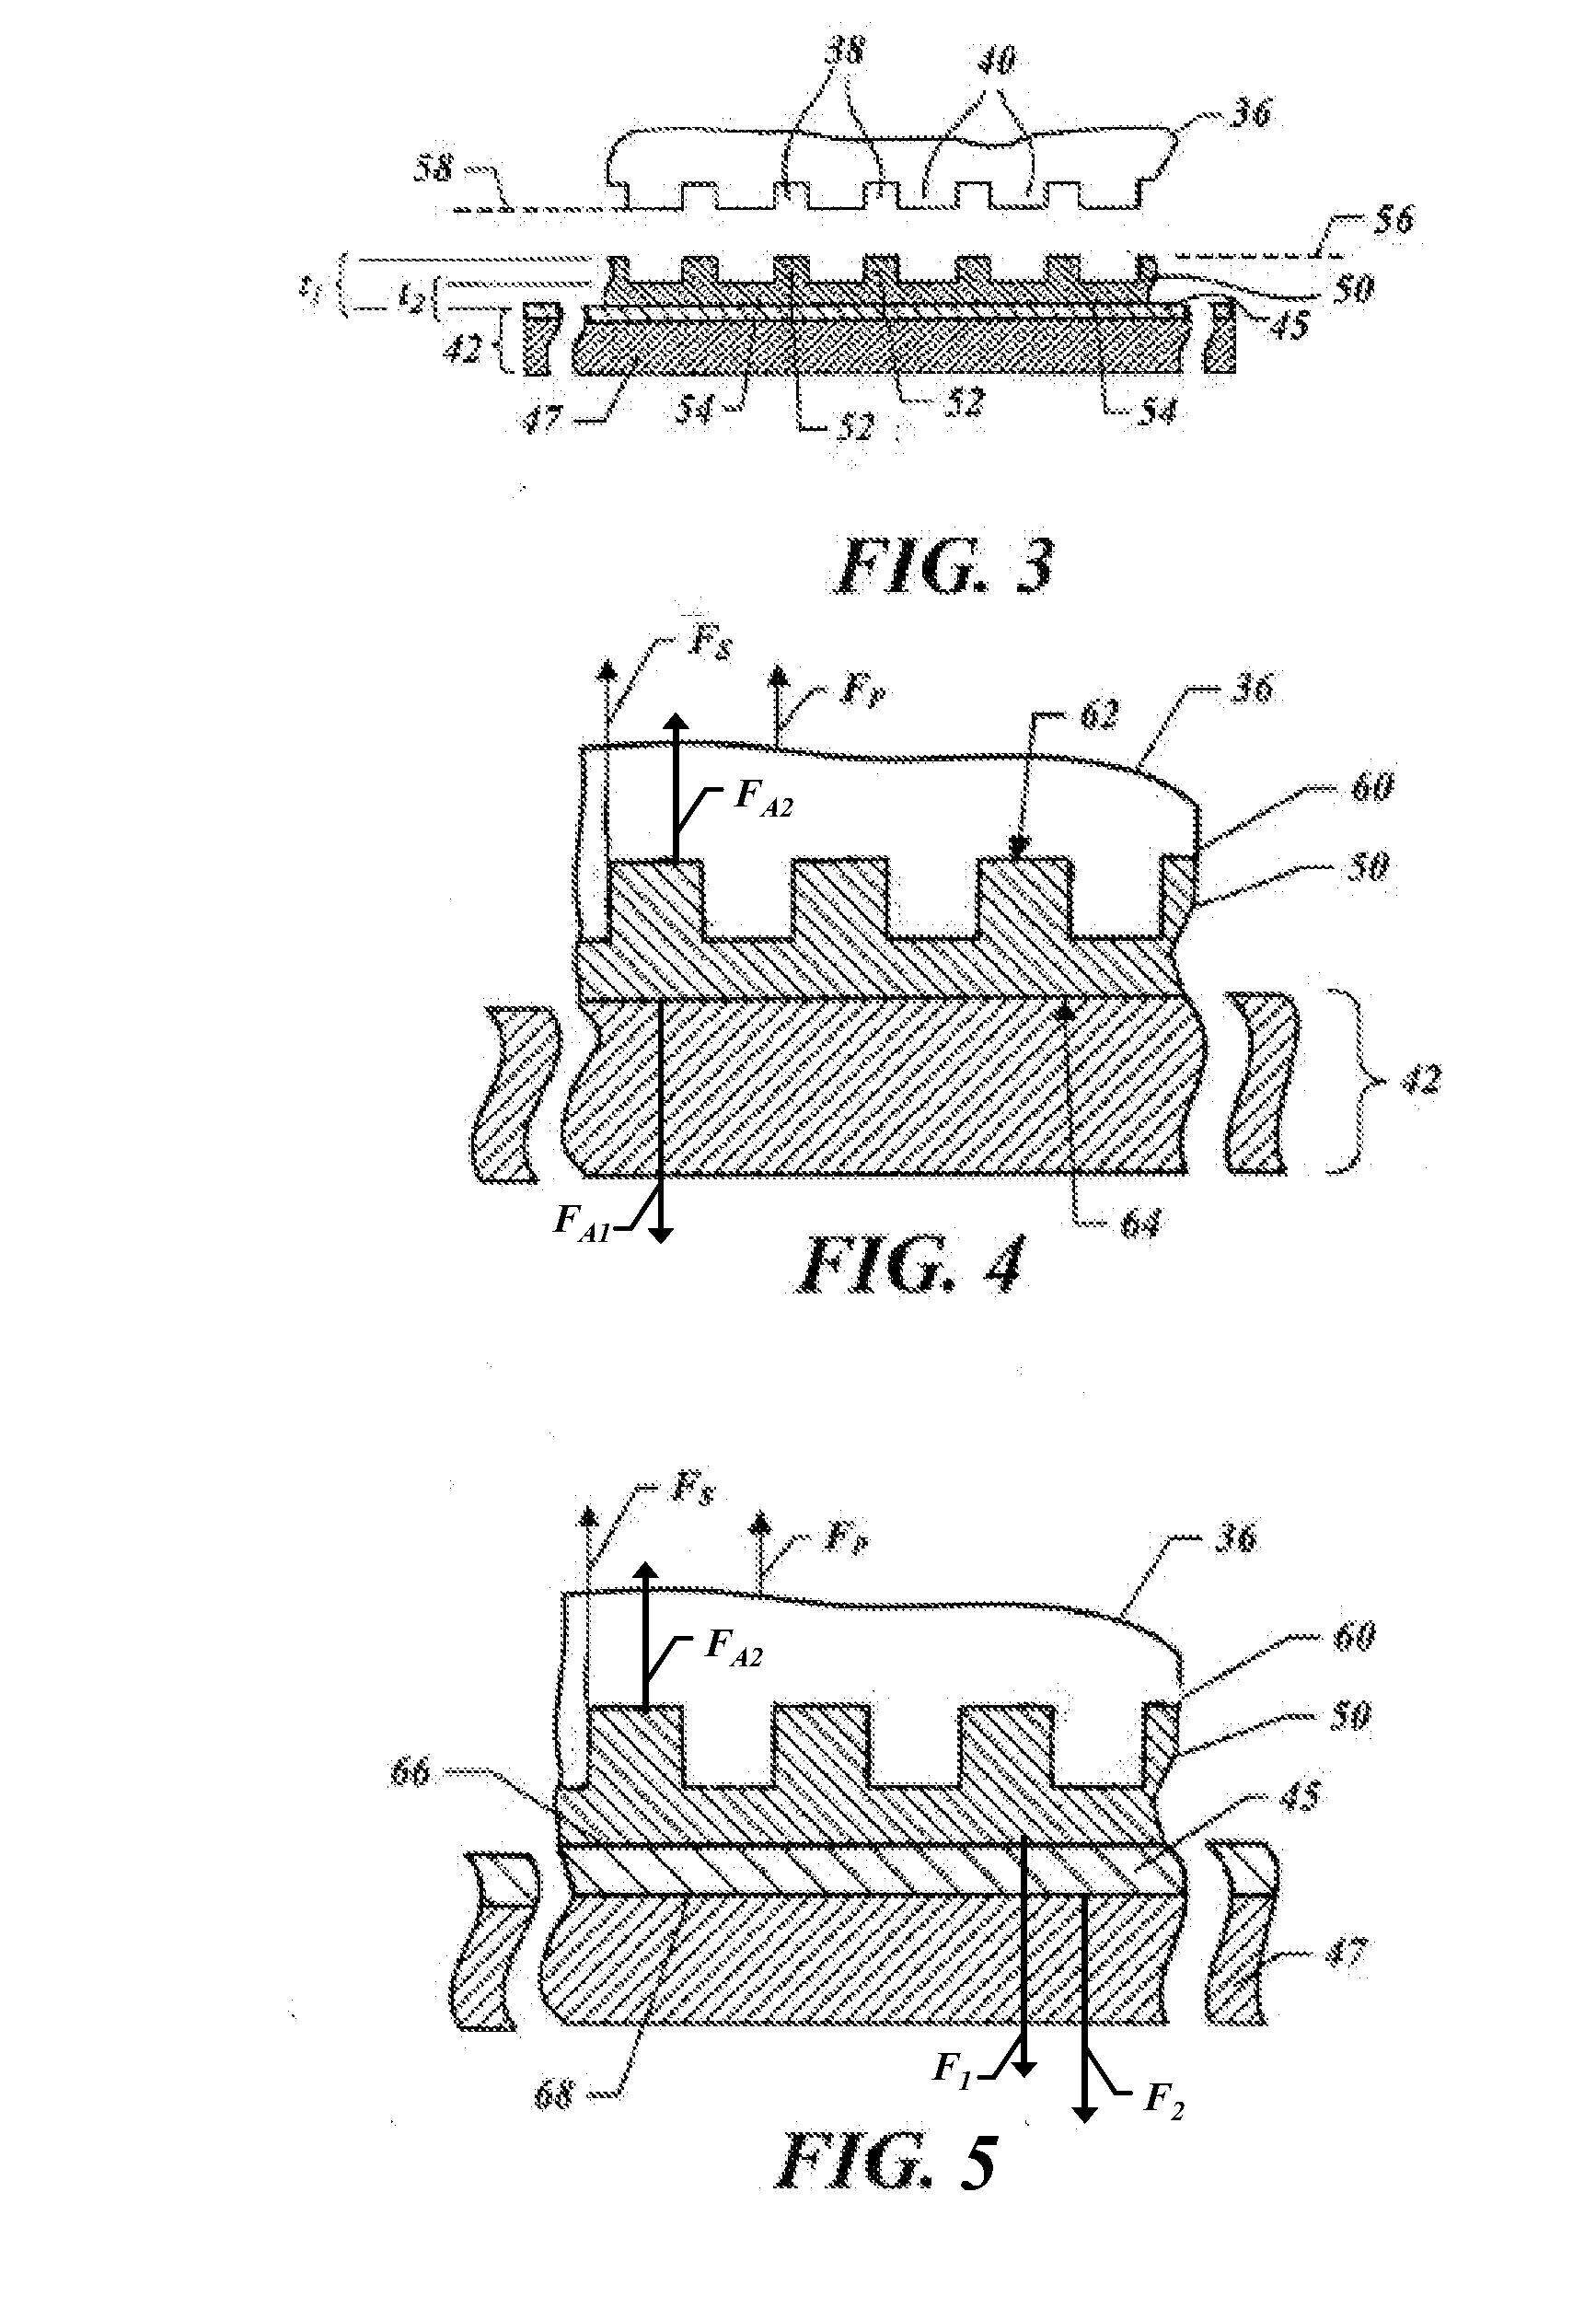 Methods and Compositions for Providing Preferential Adhesion and Release of Adjacent Surfaces